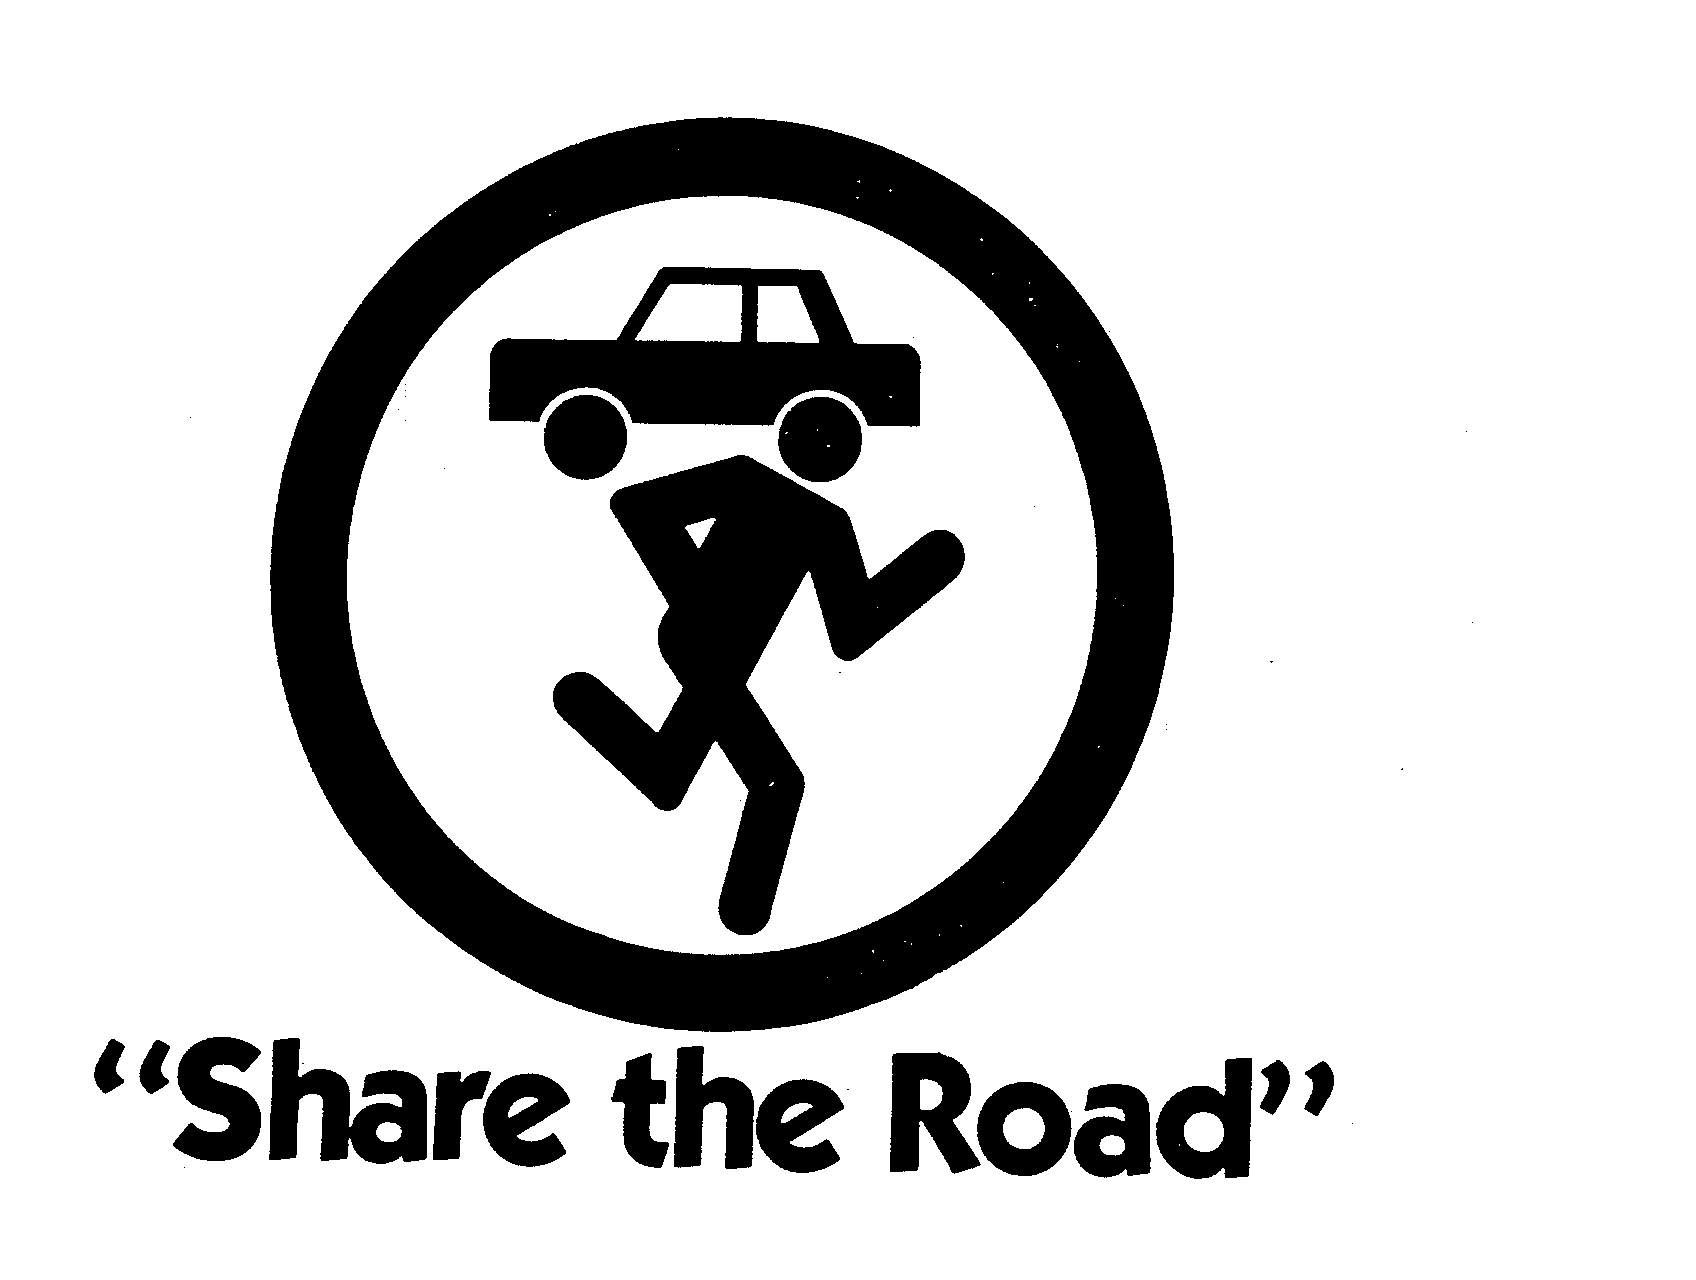  "SHARE THE ROAD"